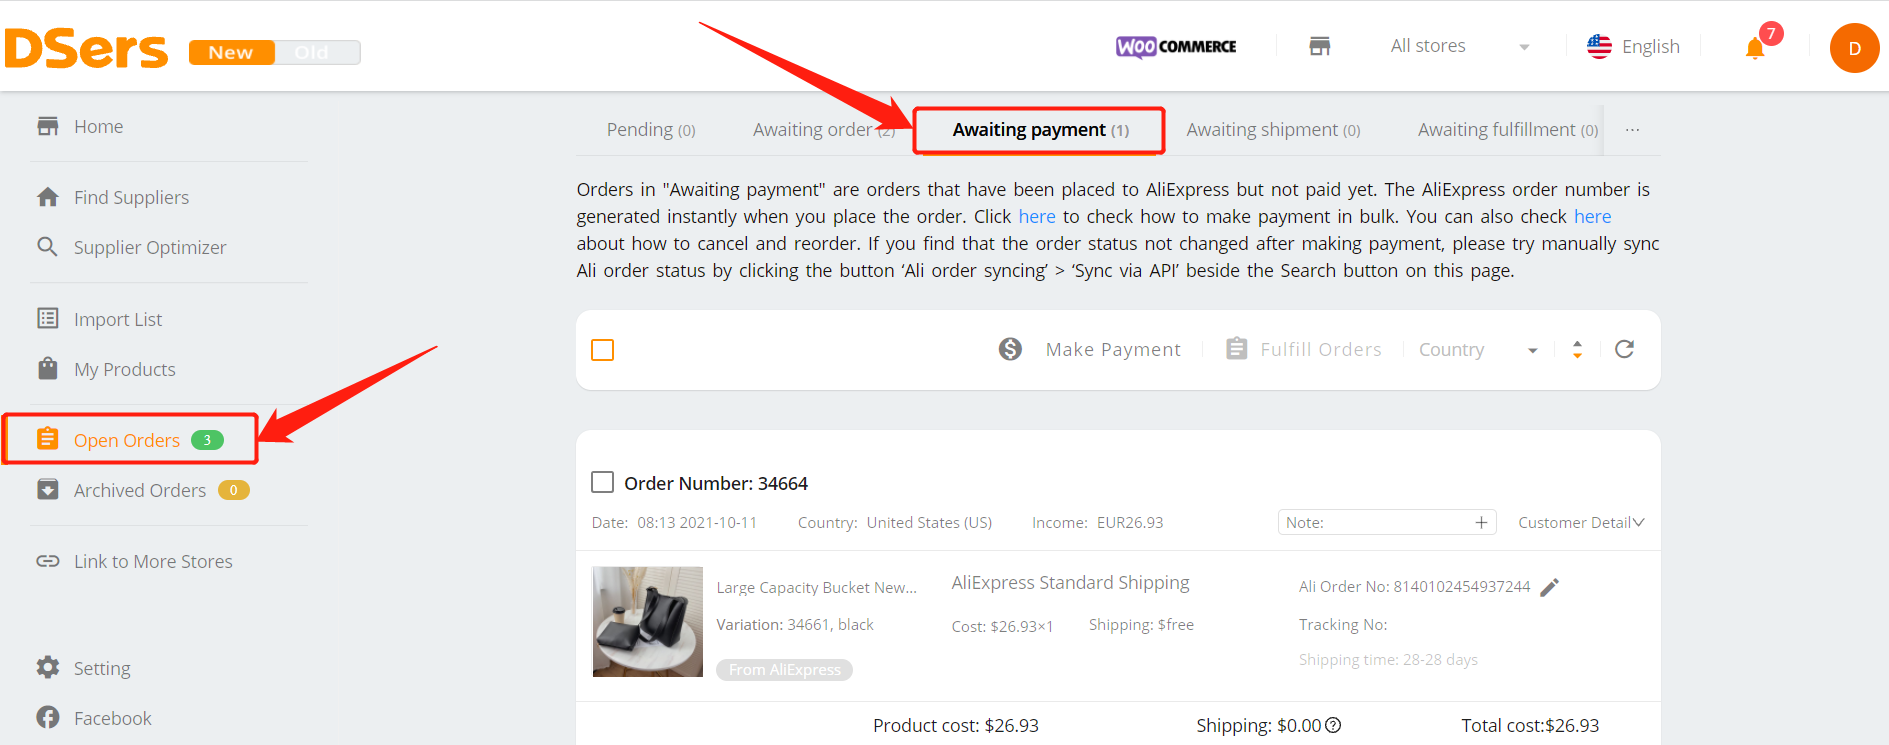 Pay an order on AliExpress - Awaiting order - Woo DSers